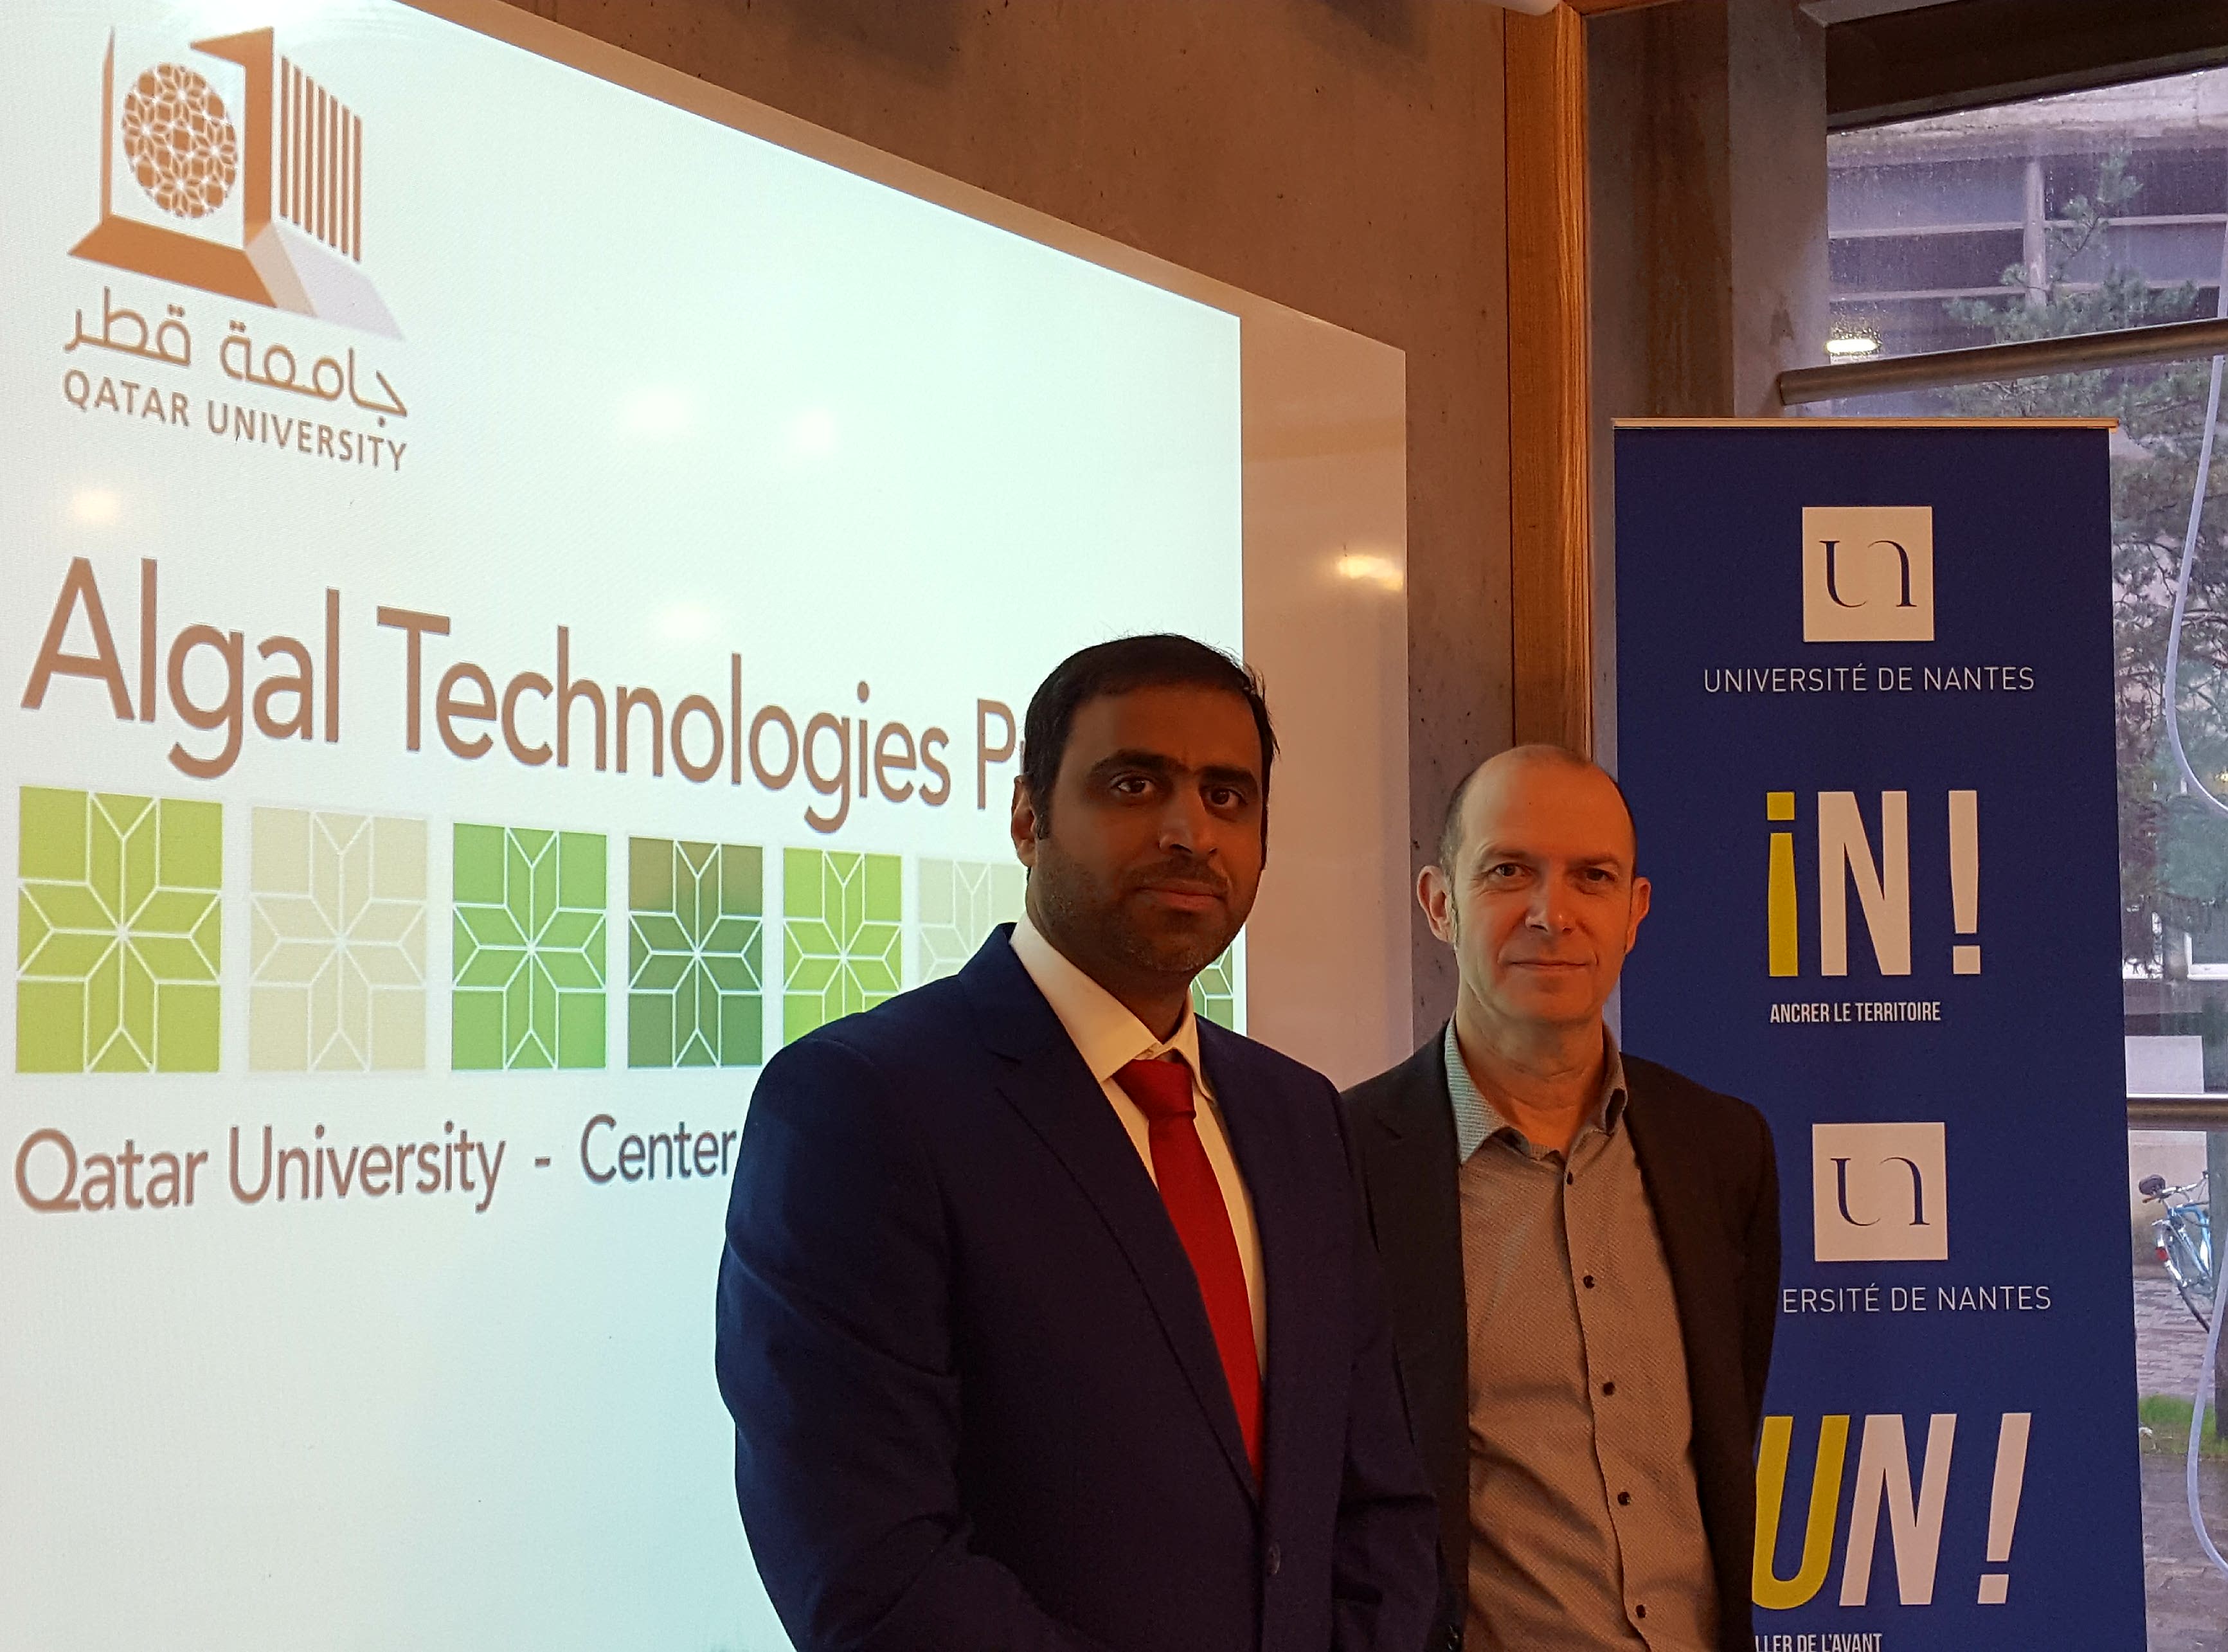 Pr. Thierry Brousse, Vice-Dean in Charge of Innovation at the University of Nantes, has welcomed Dr. Hareb Al Jabri, from Qatar University.